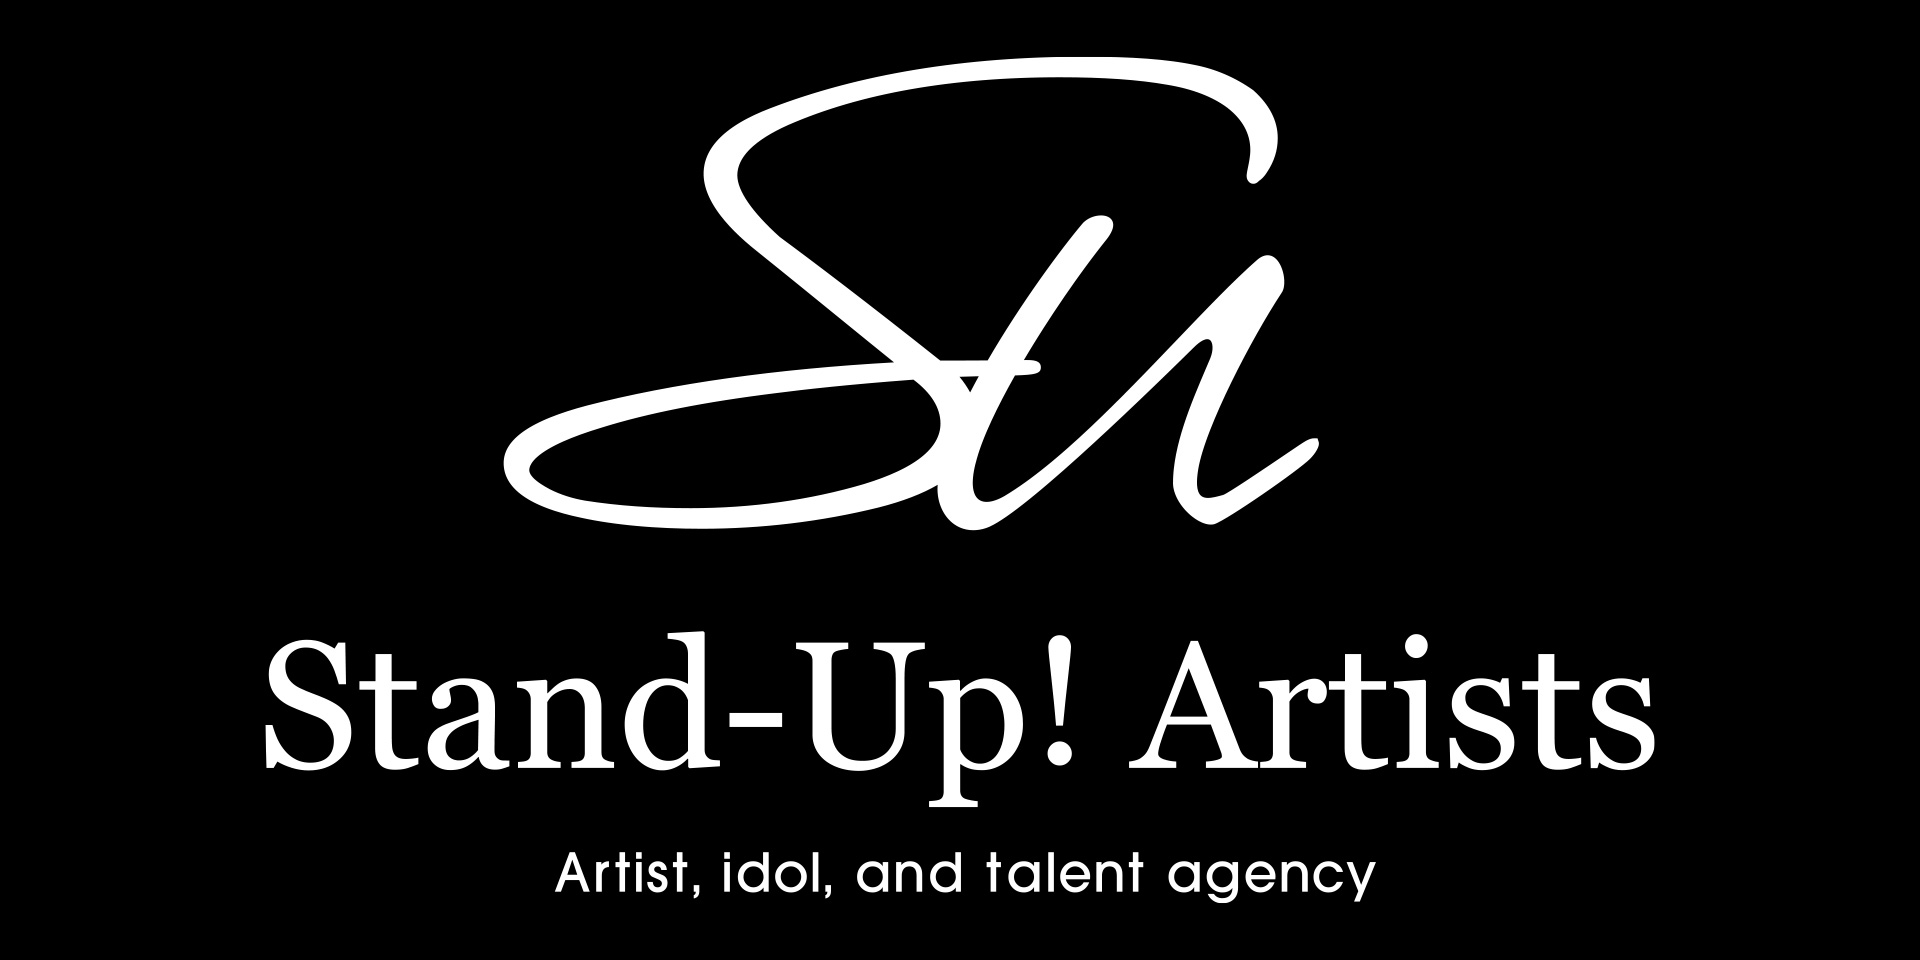 Stand-Up! Artists